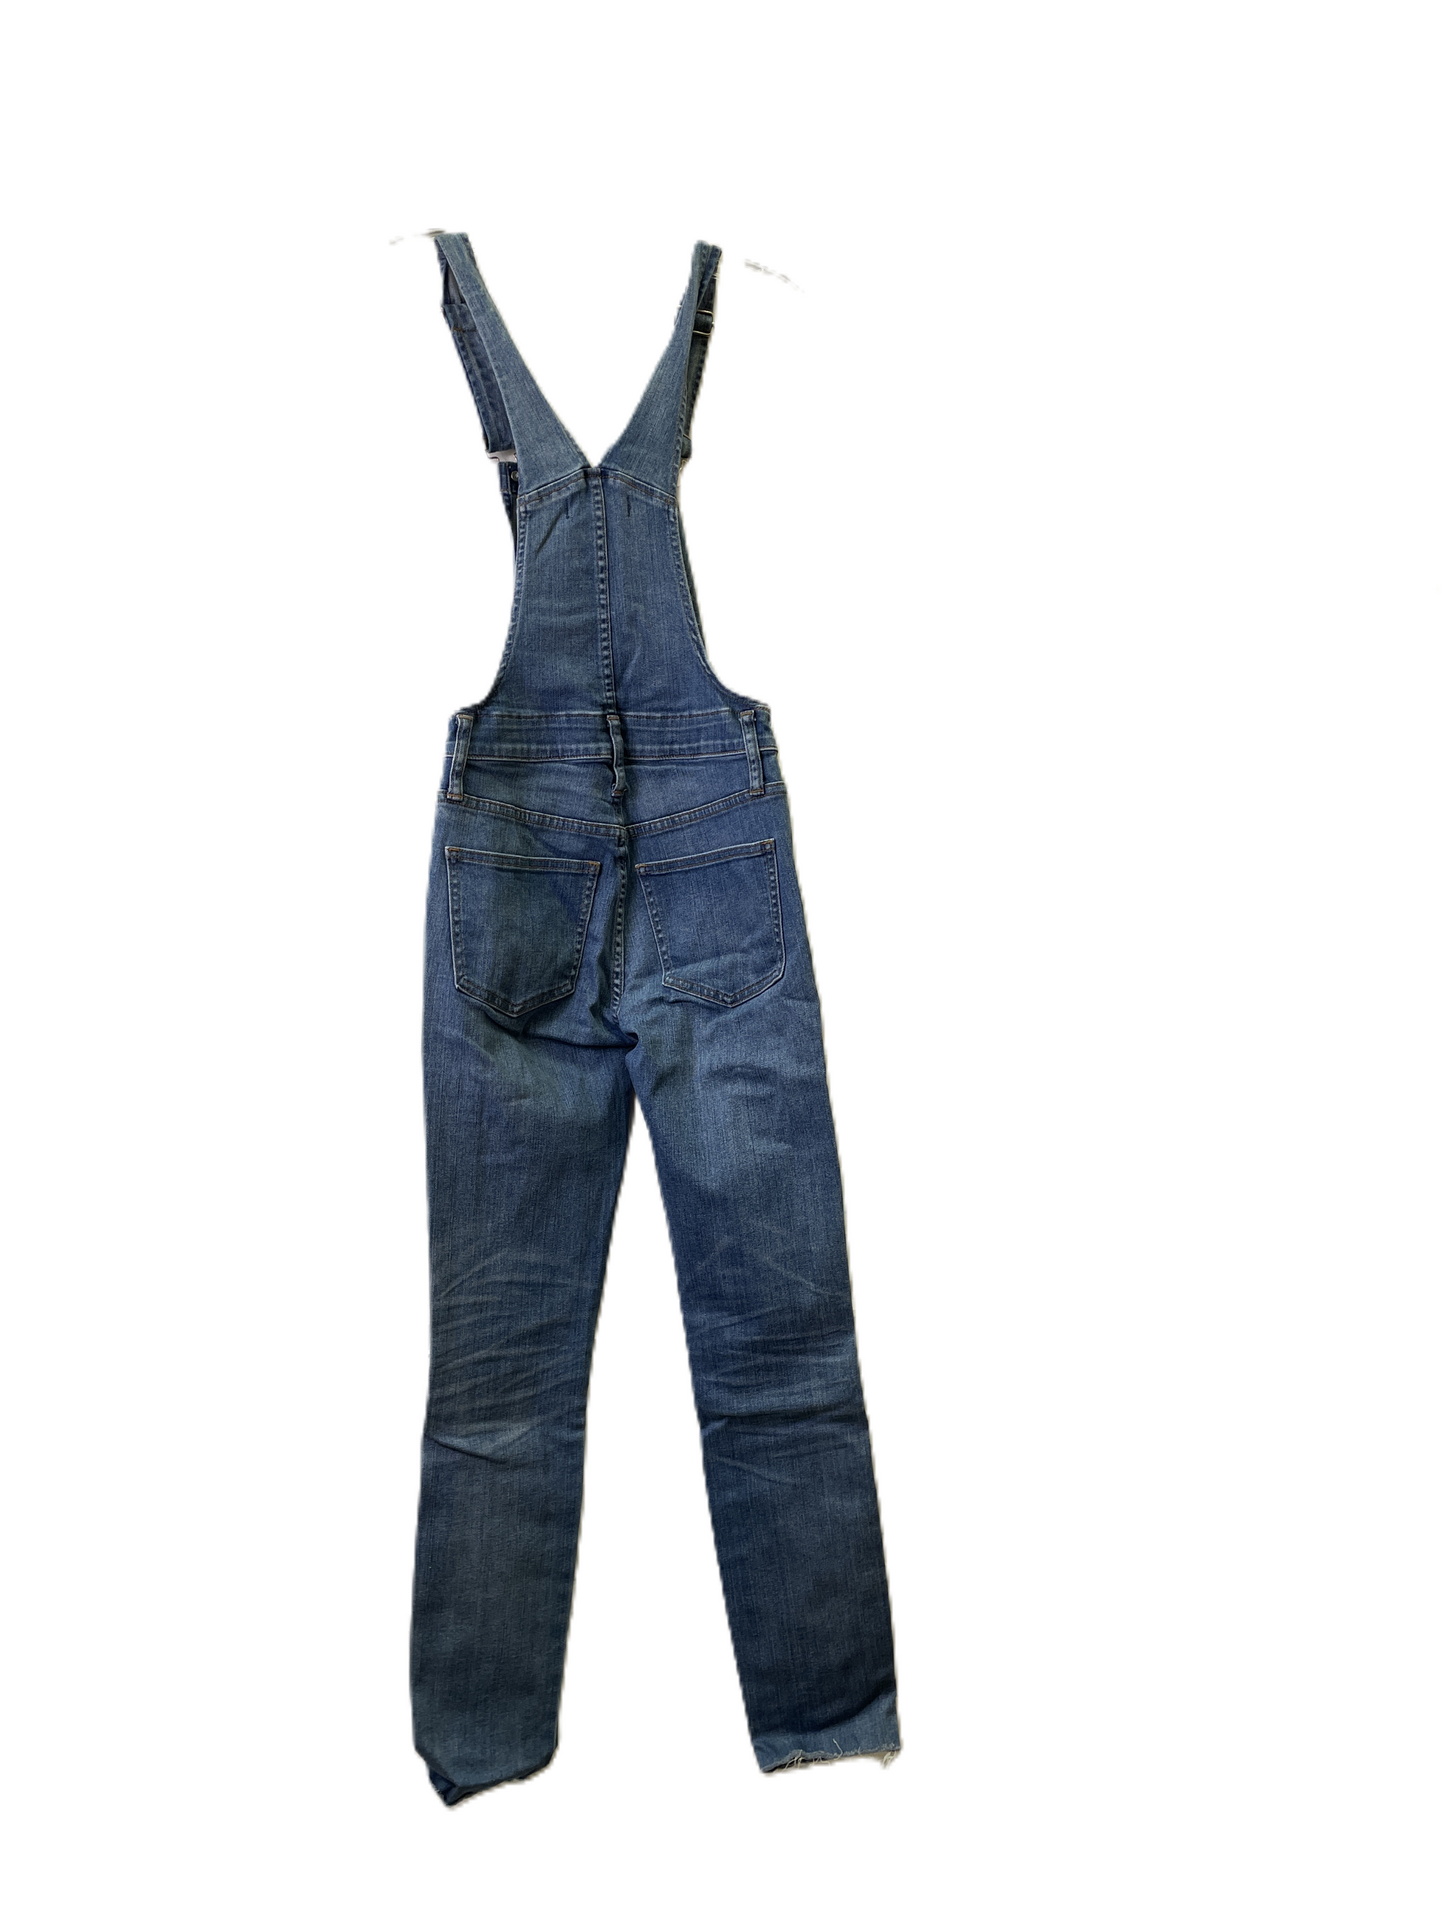 Blue Denim Overalls By Madewell, Size: Xxs